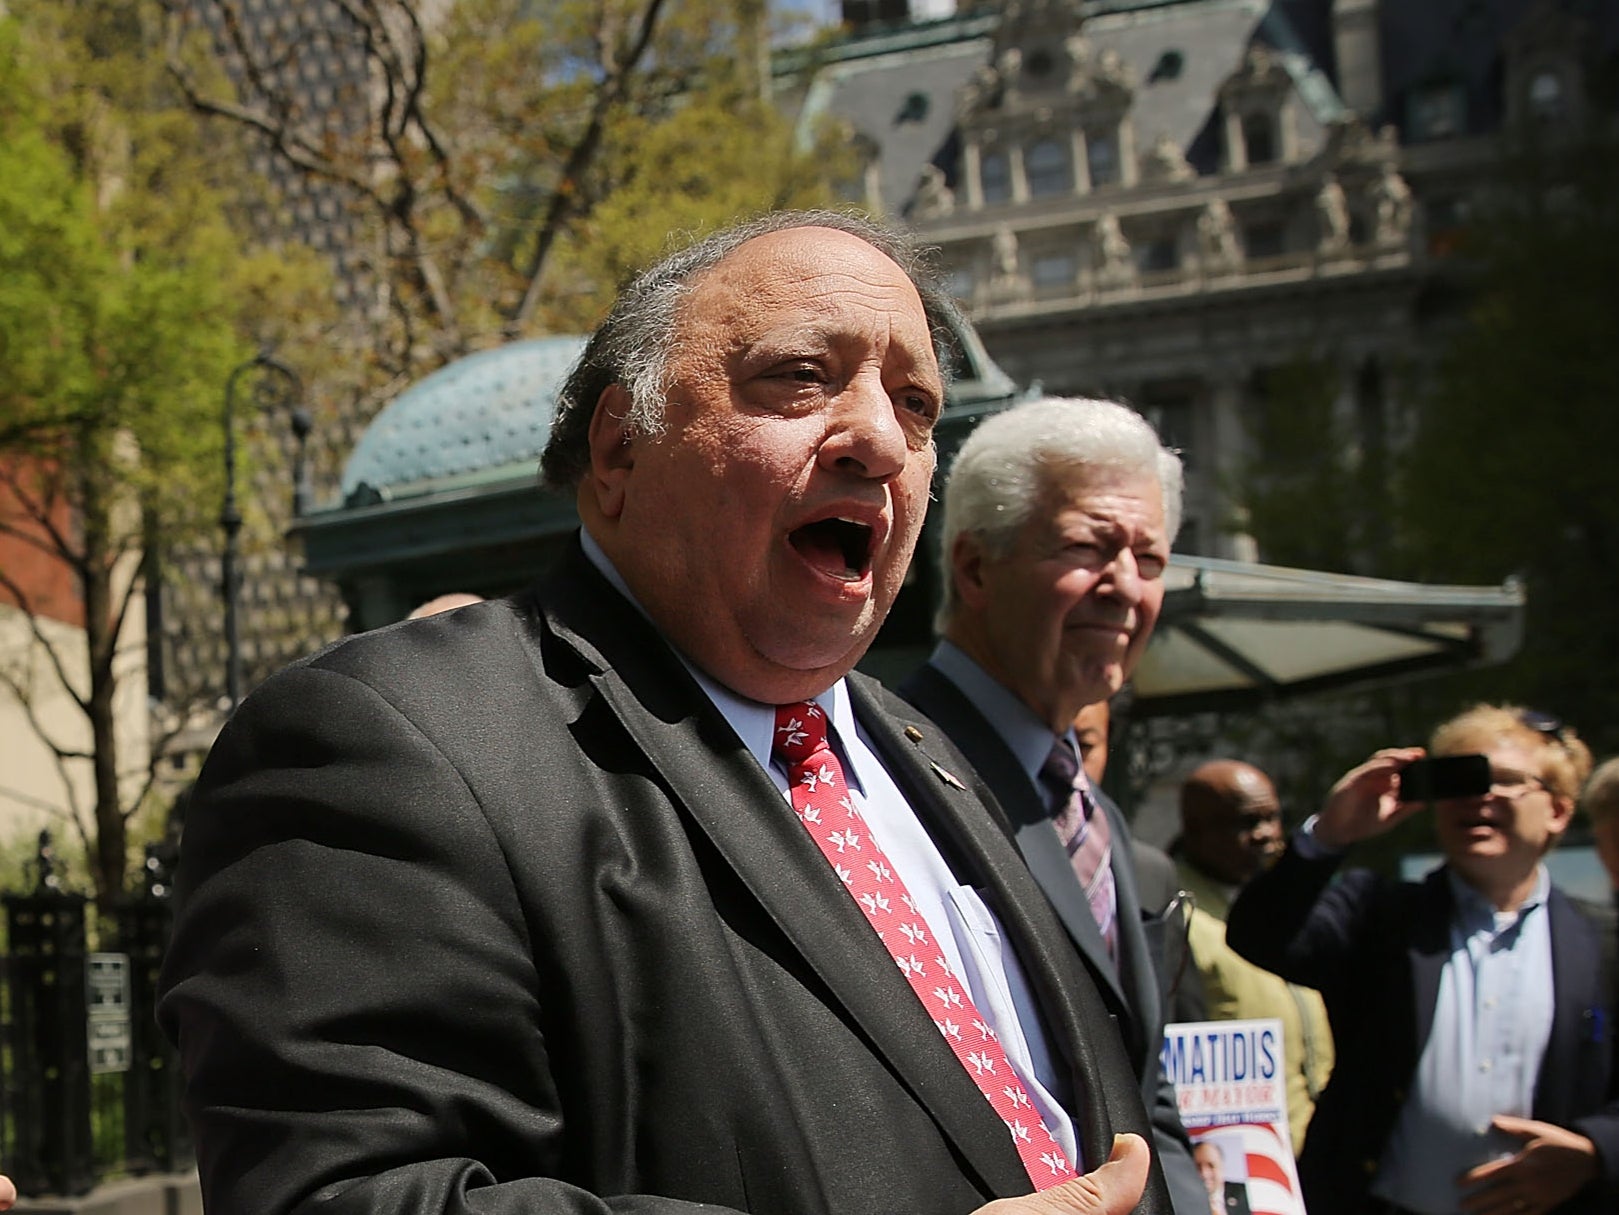 Mr Catsimatidis hopes that bringing more pandas over will help “promote culture”